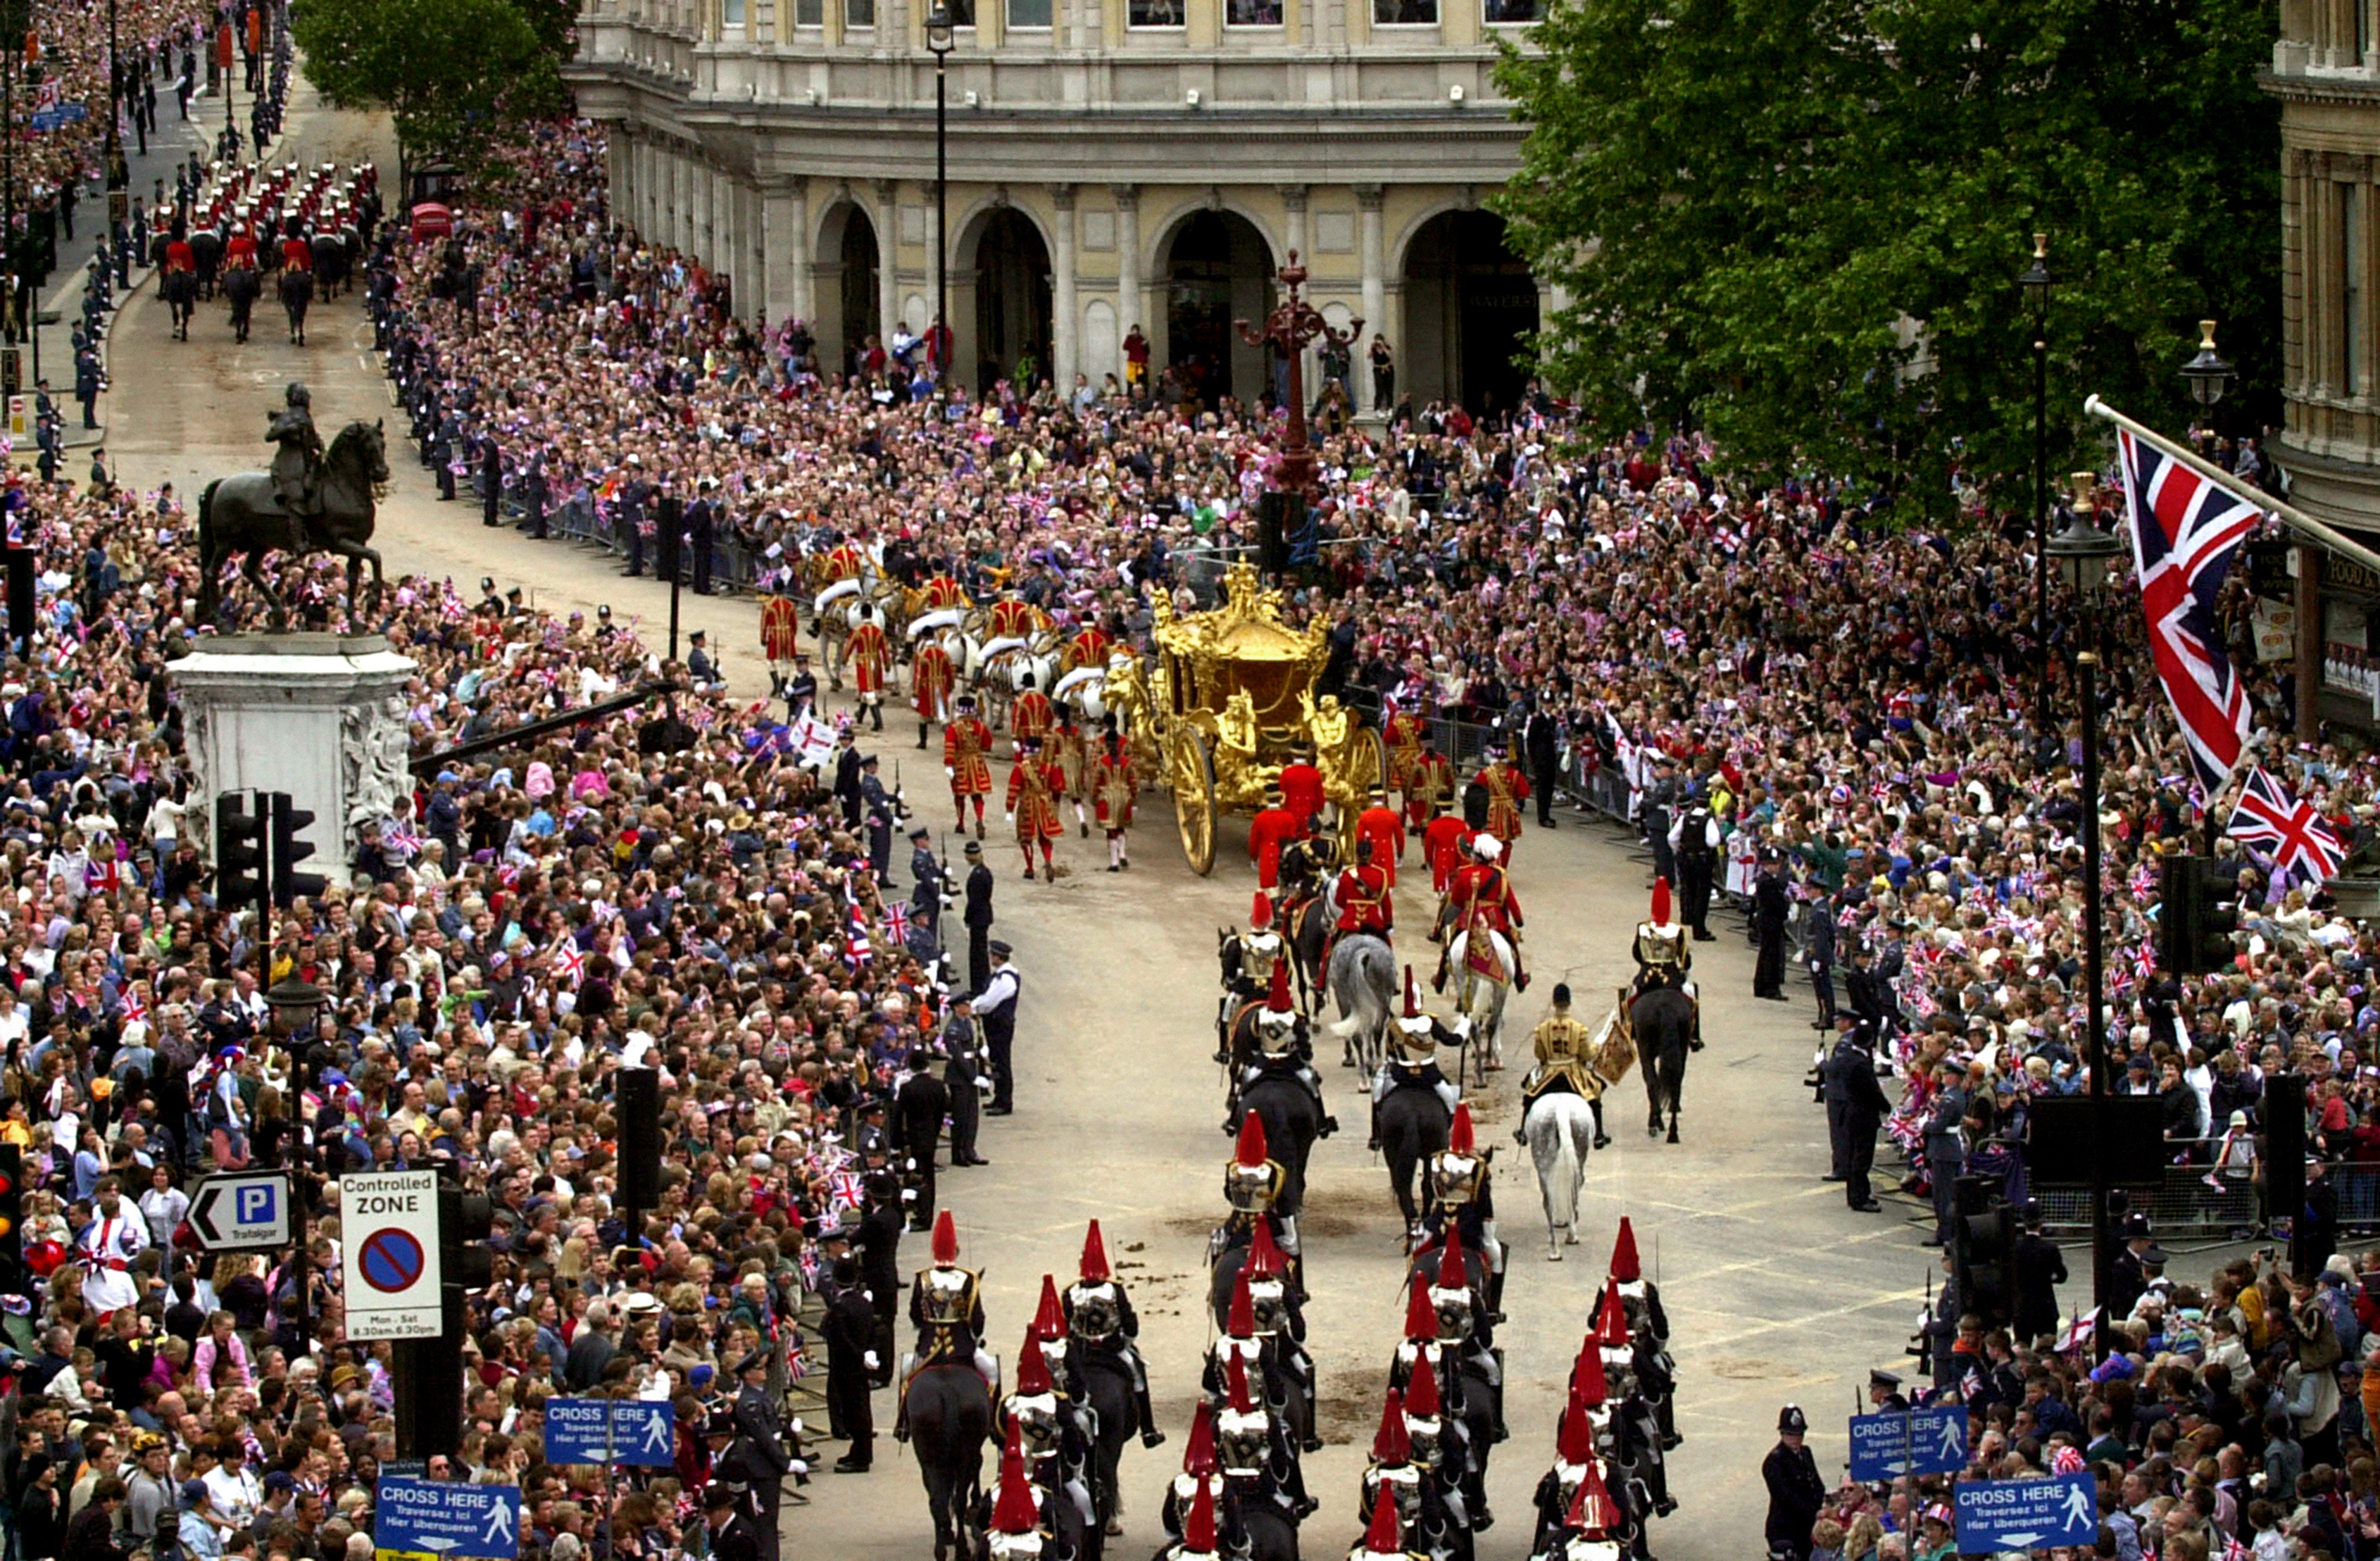 Crowds lining the street as the Queen rides in the Gold State Coach from Buckingham Palace to St Paul’s Cathedral (Barry Batchelor/PA)